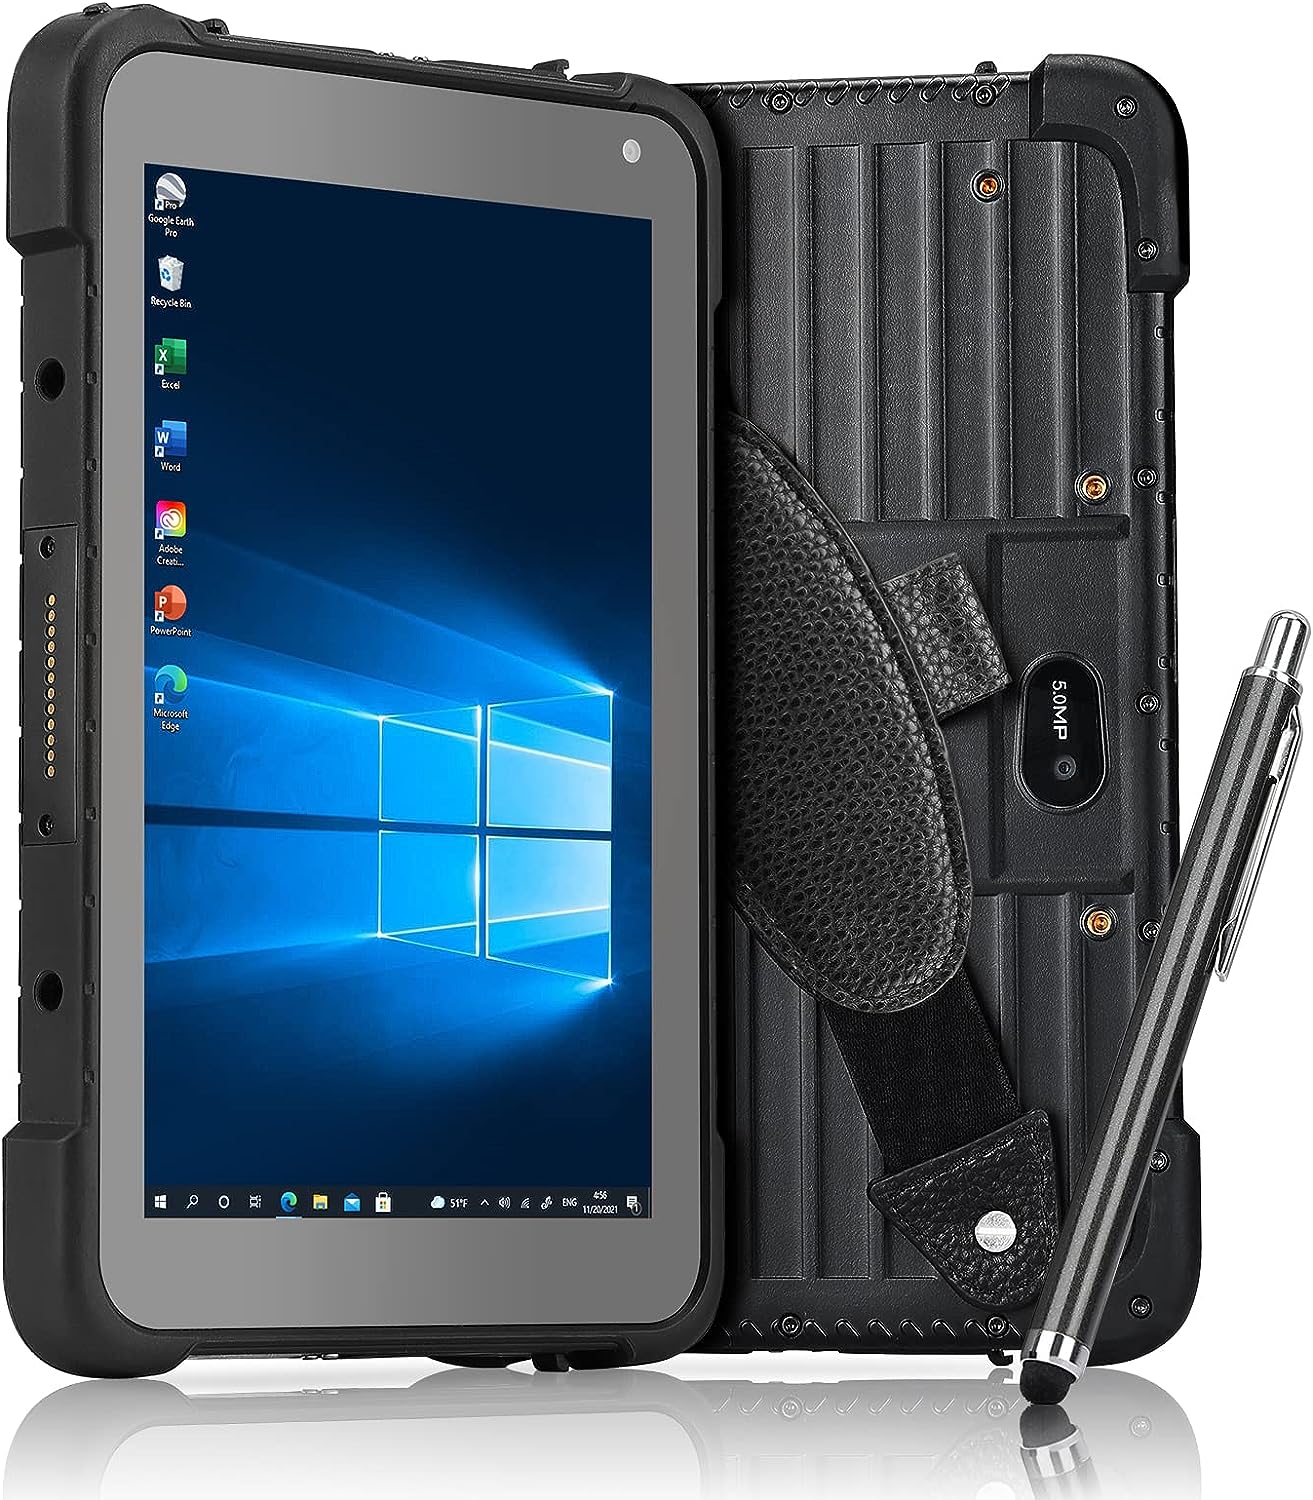 MUNBYN Rugged Tablet, 8-inch Industrial Tablet PC [...]